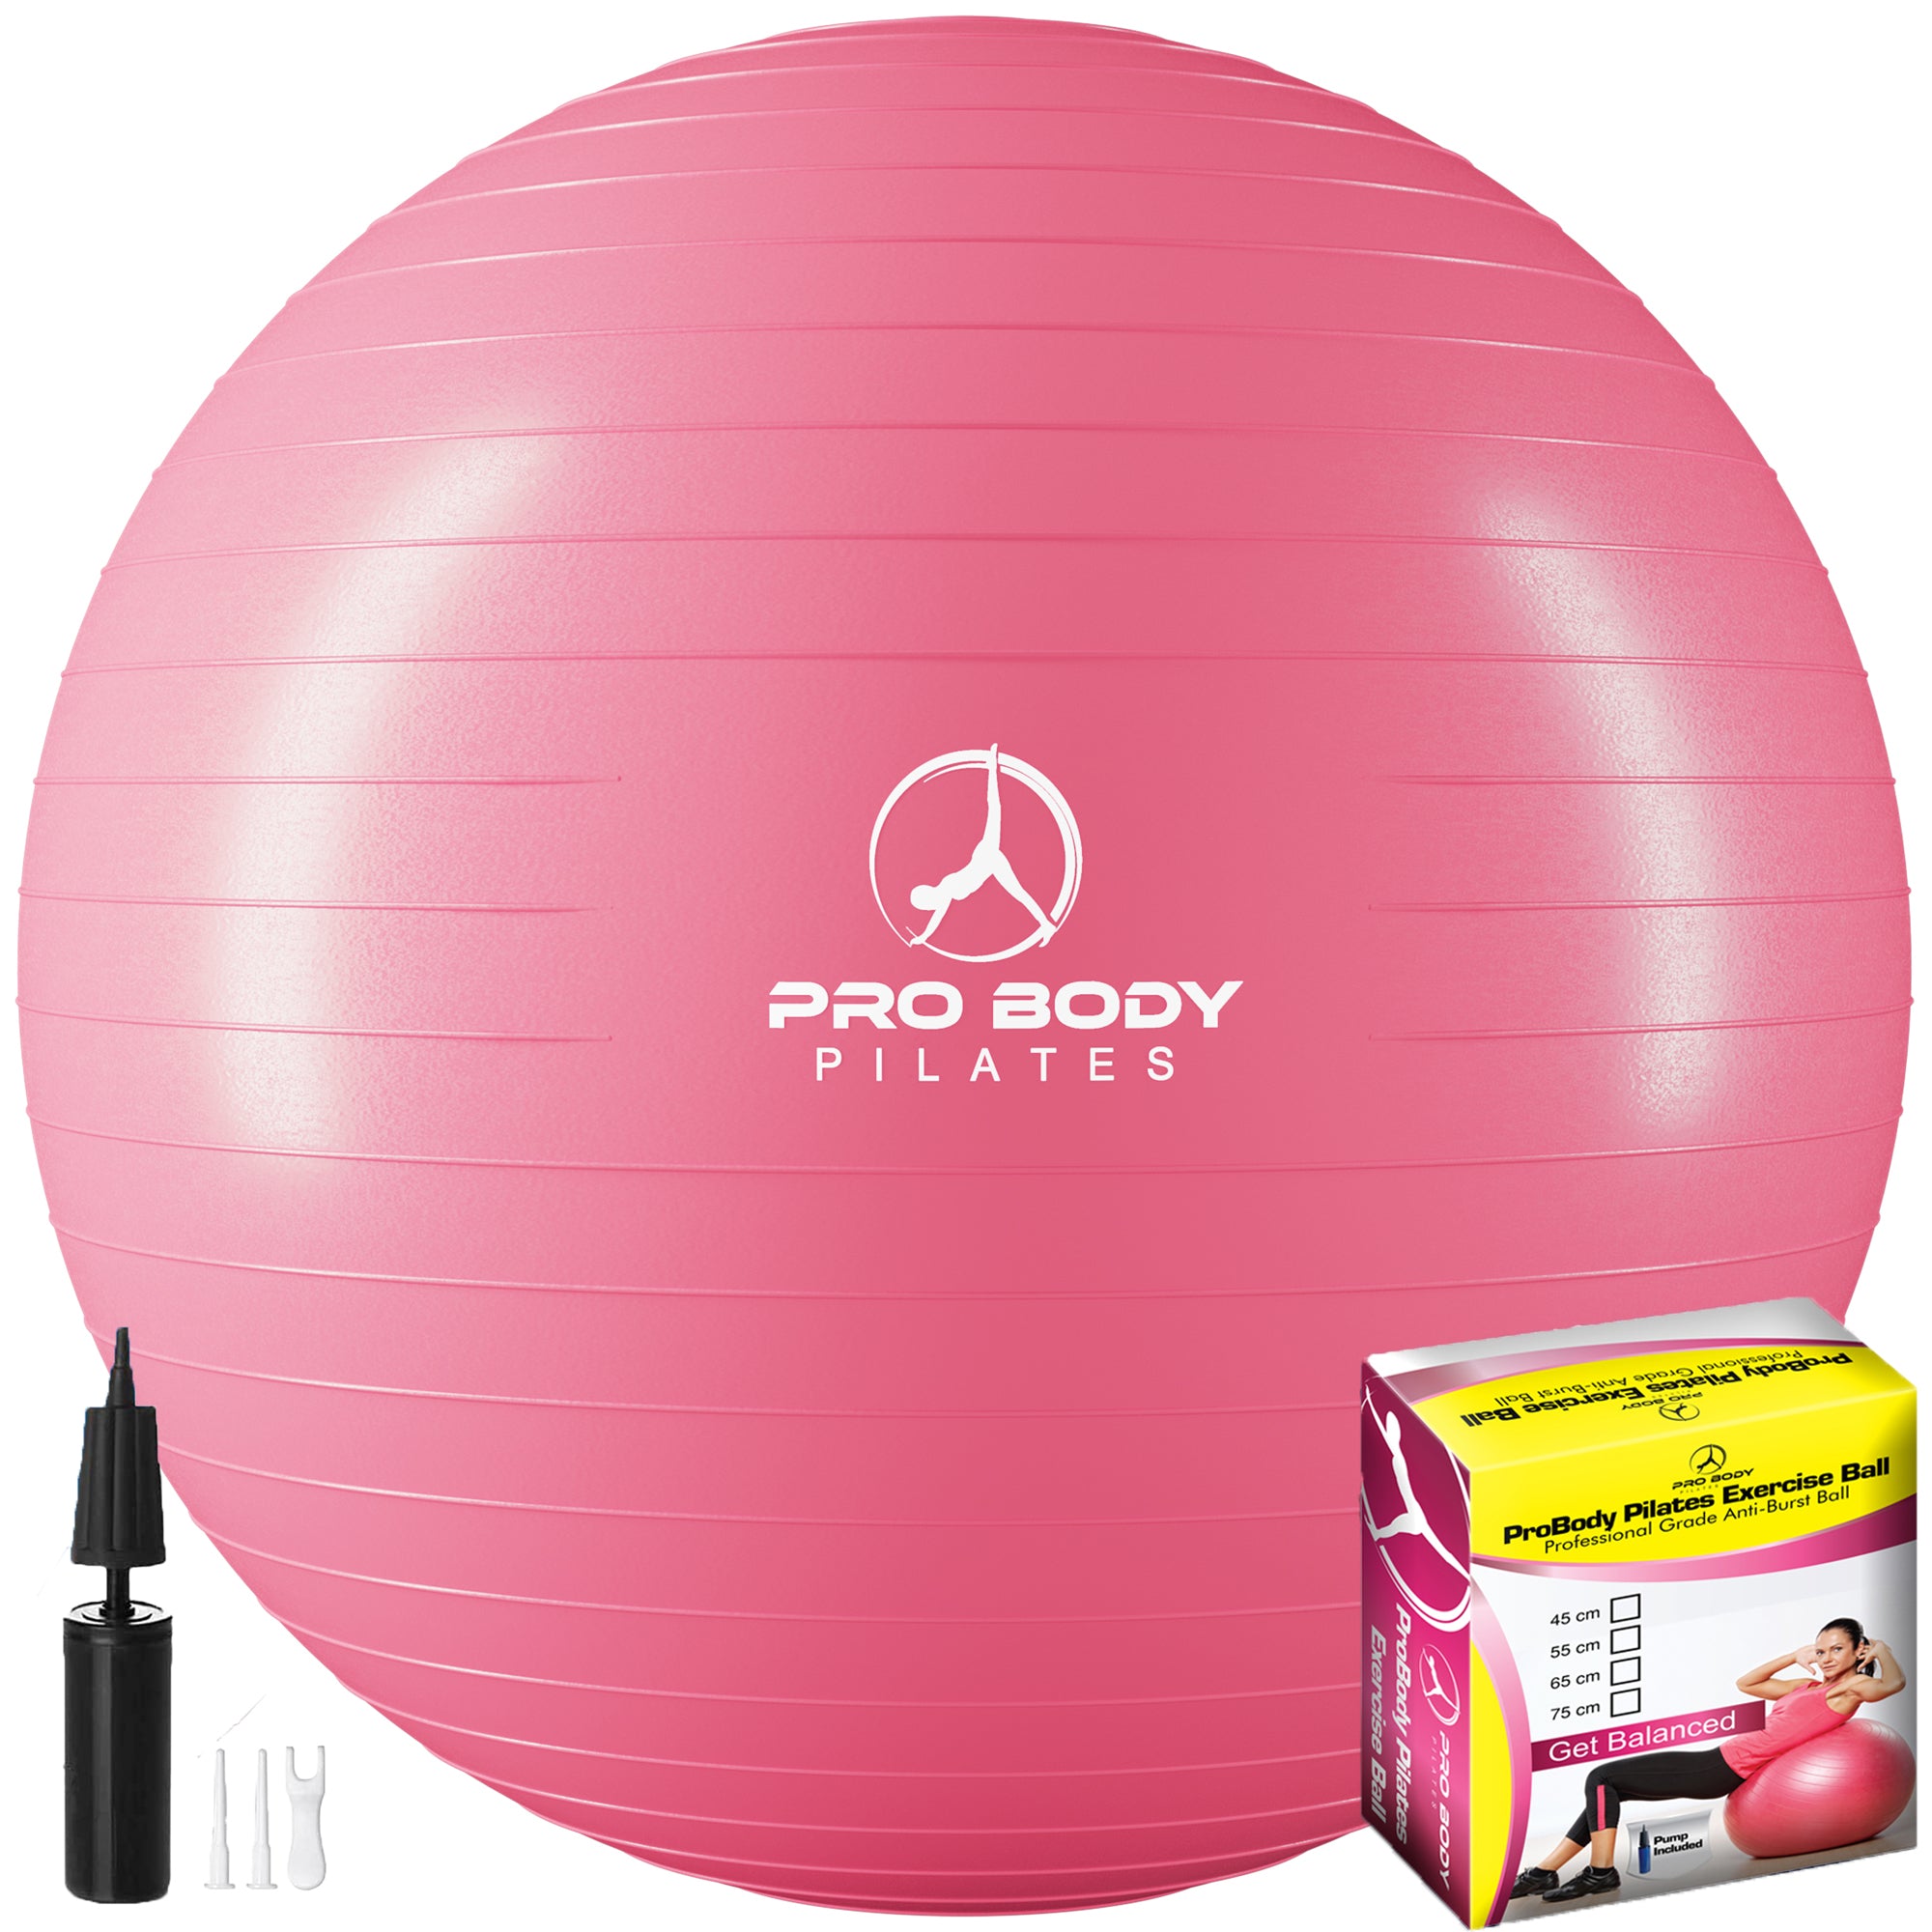 Yoga Ball for Pregnancy, Fitness, Balance, Workout at Home, Office and  Physical Therapy (Pink)